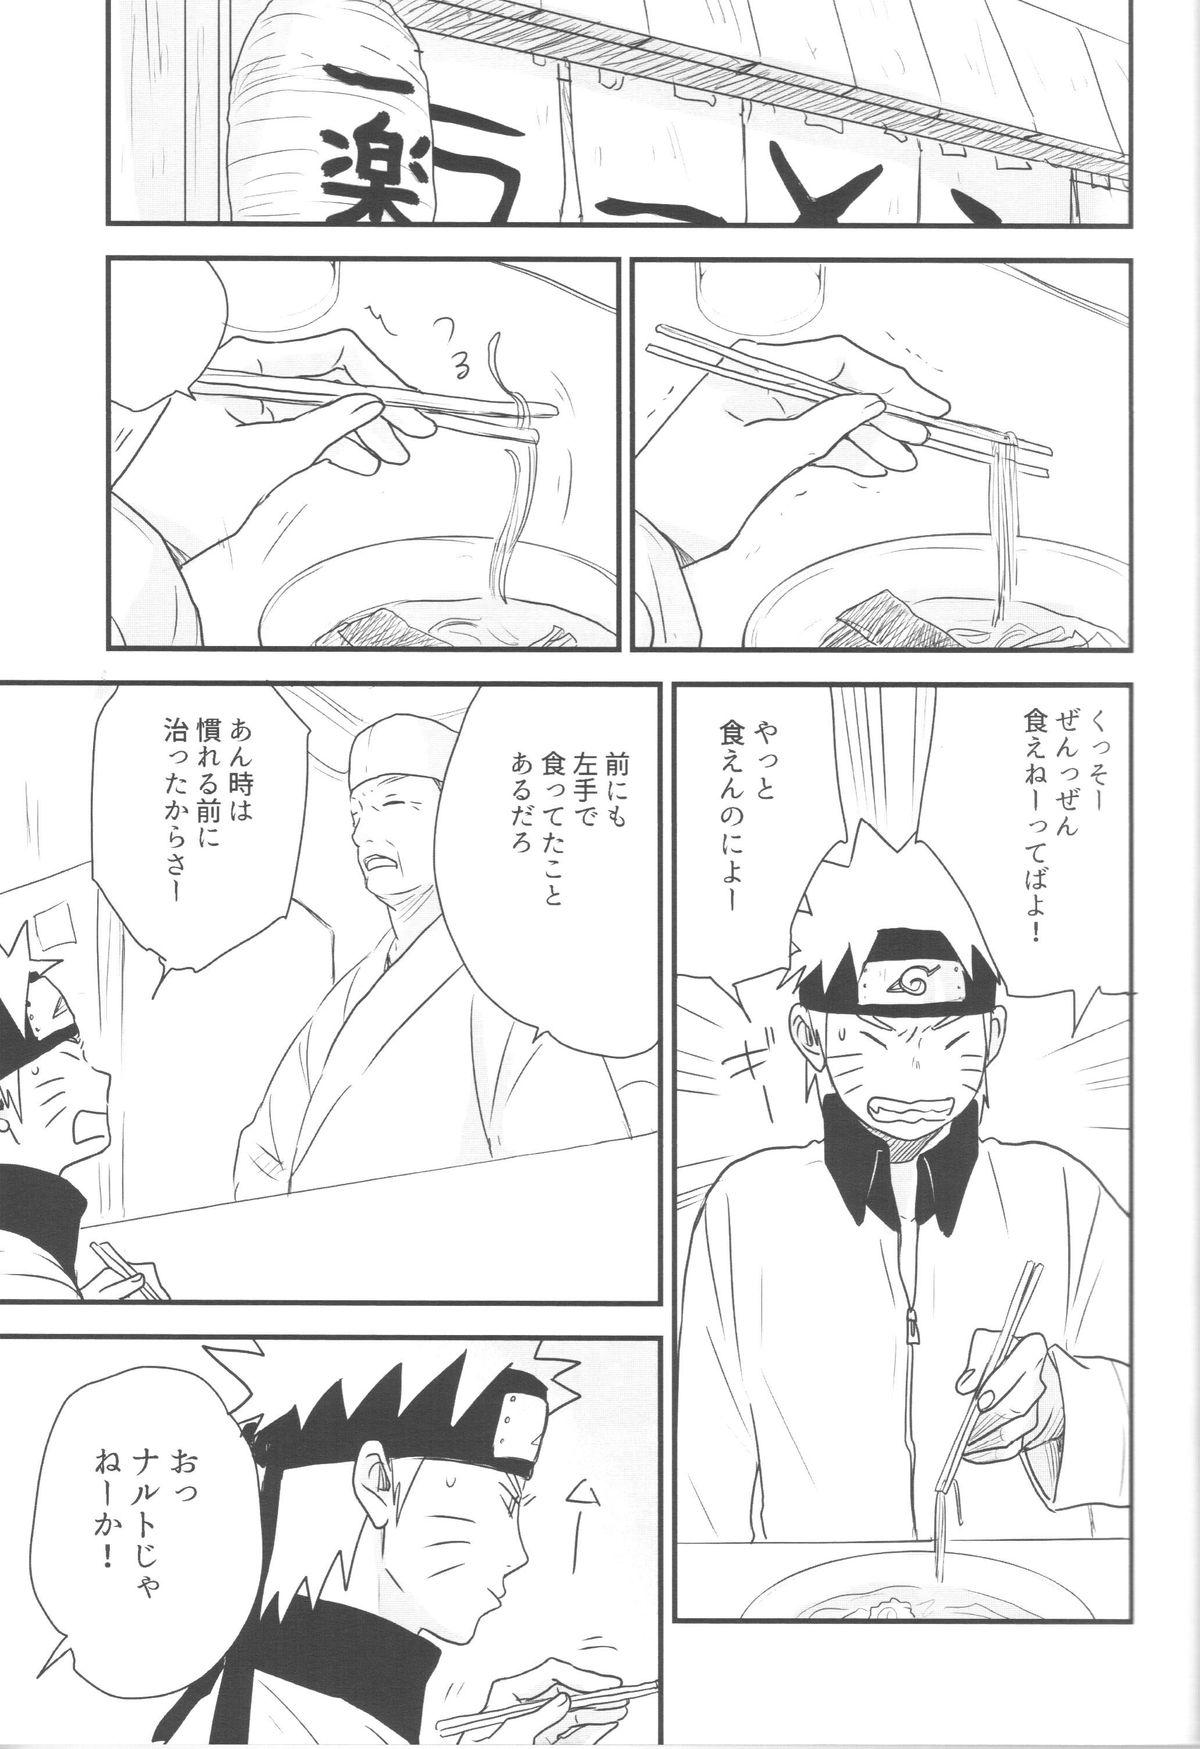 Phat A Sweet Nightmare - Naruto Hardcore - Page 7